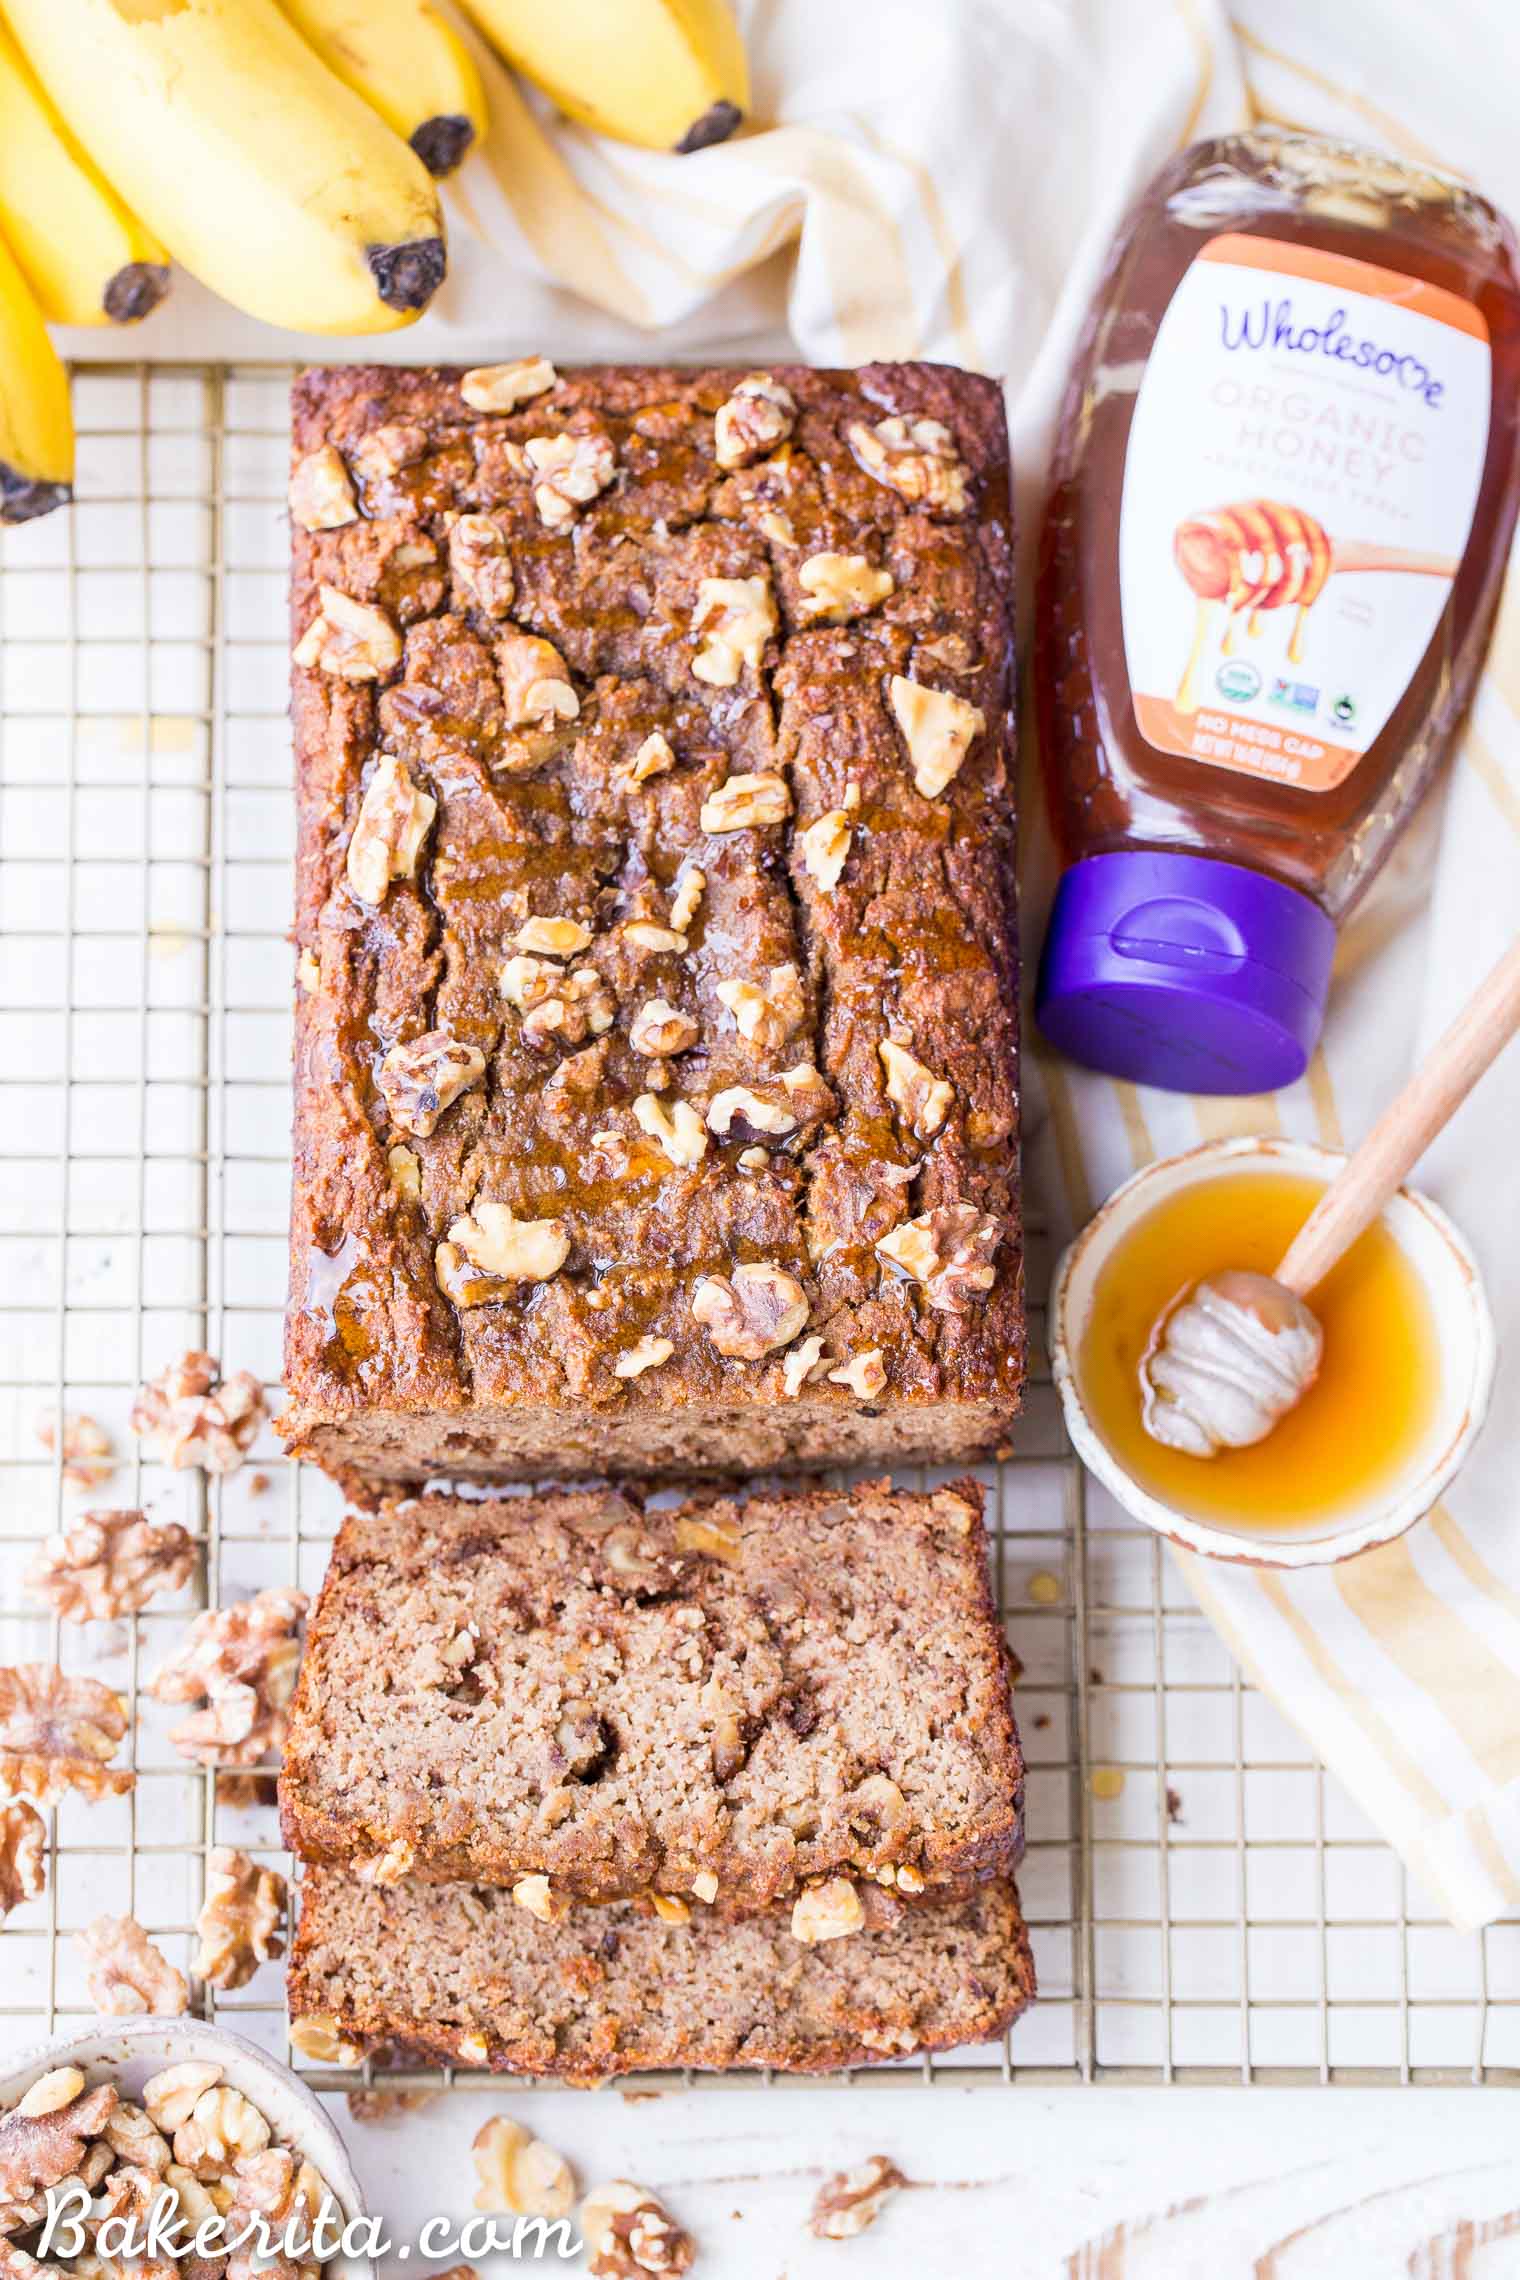 This Paleo Honey Nut Banana Bread is a deliciously healthy breakfast or snack that will help keep you satiated for hours. It's a lightly honey-sweetened treat that's gluten-free and grain-free and packed with crunchy walnuts.